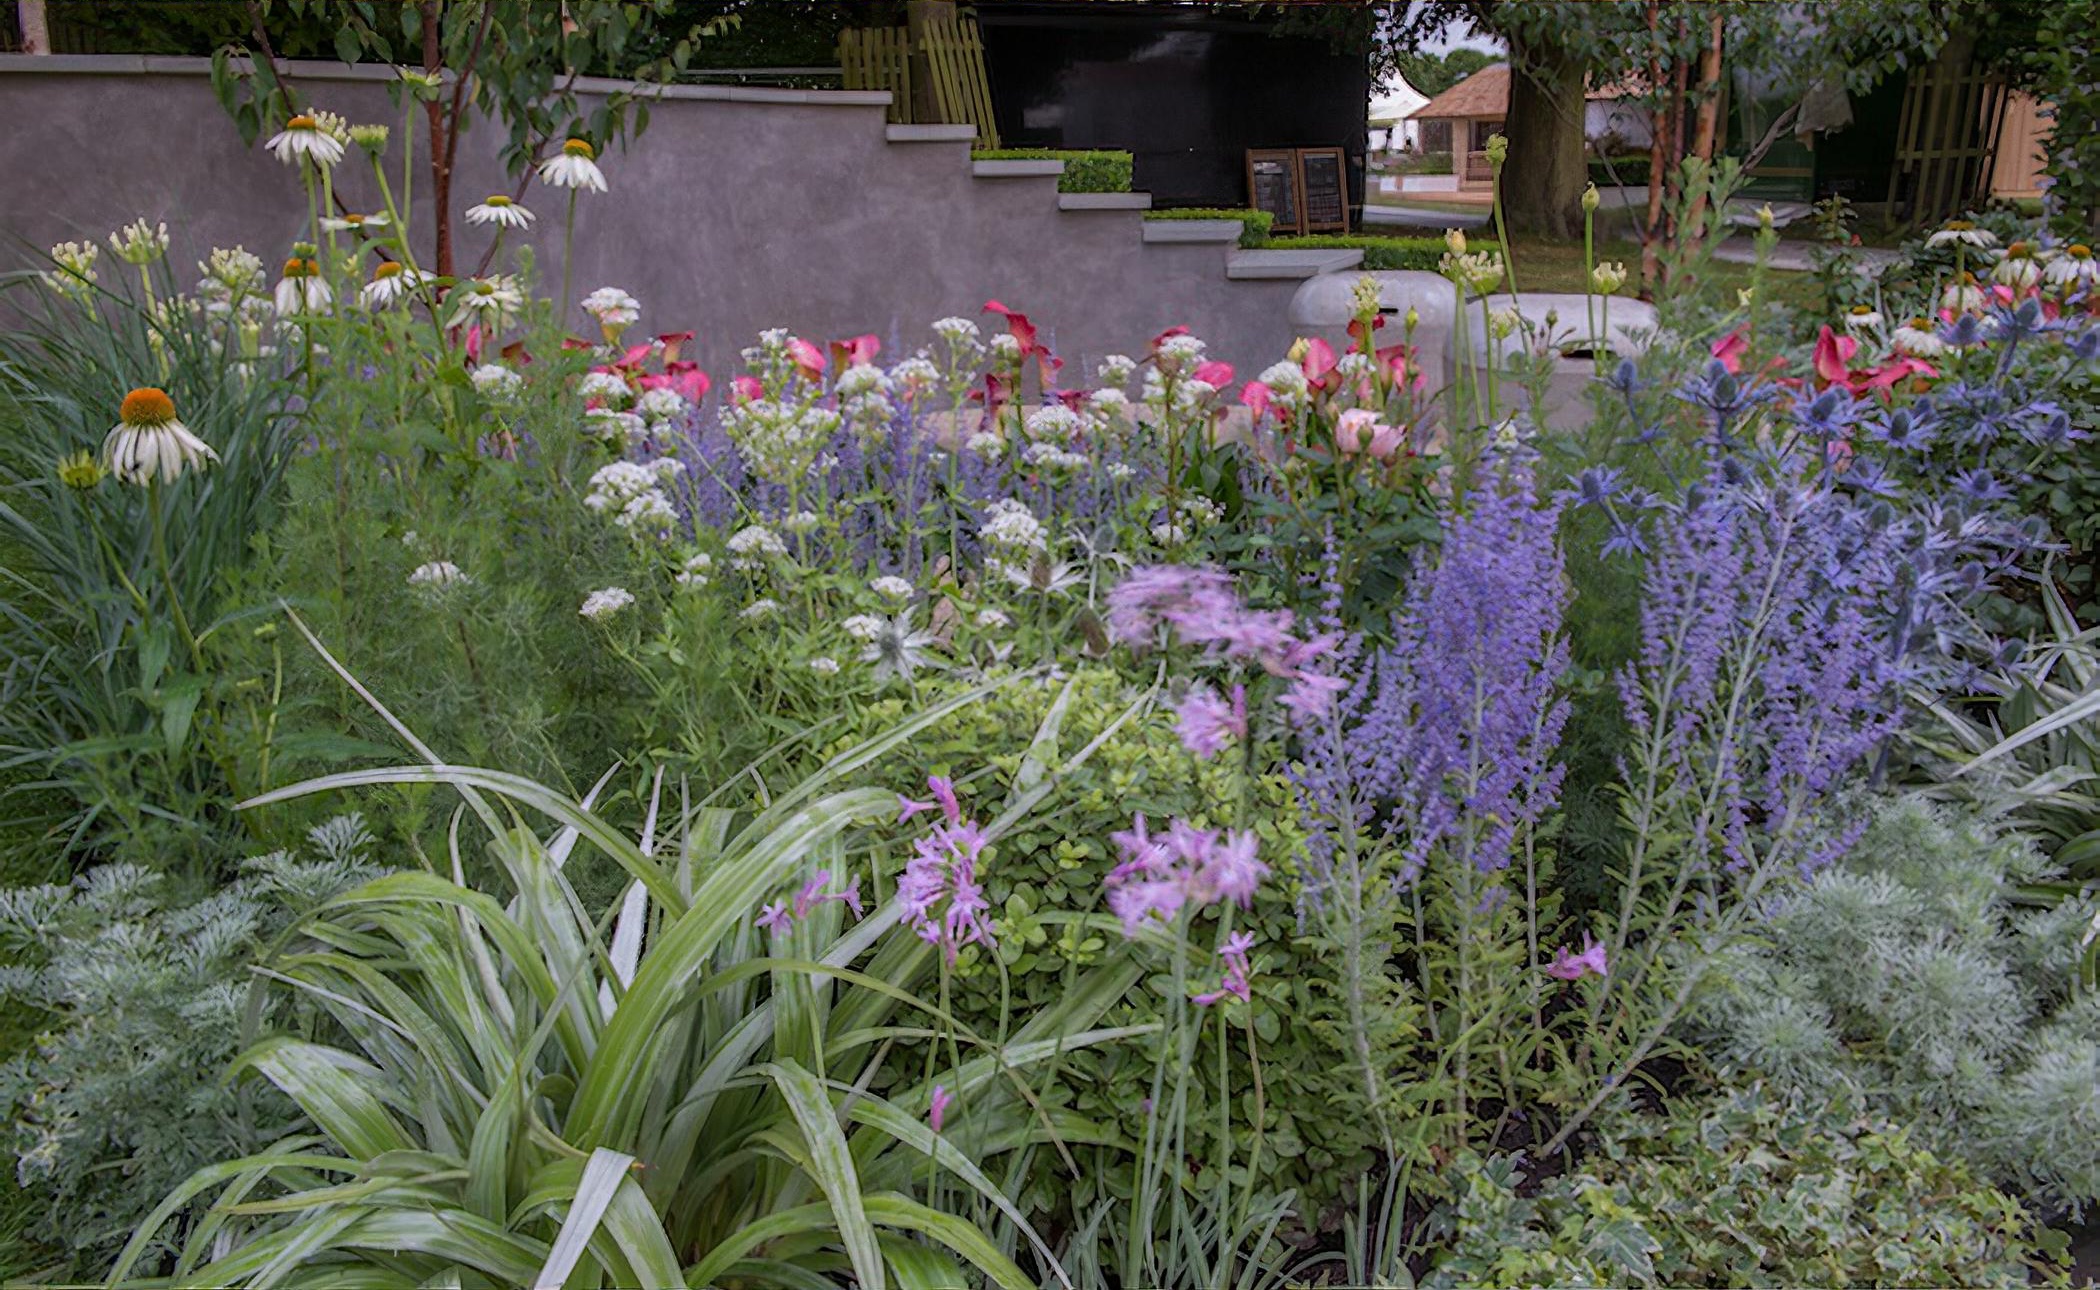 The garden, On The Edge, has been designed by RHS Chelsea Flower Show Gold Winner Frederic Whyte and built by Charles Benton, of co-sponsors Benton Landscapes.